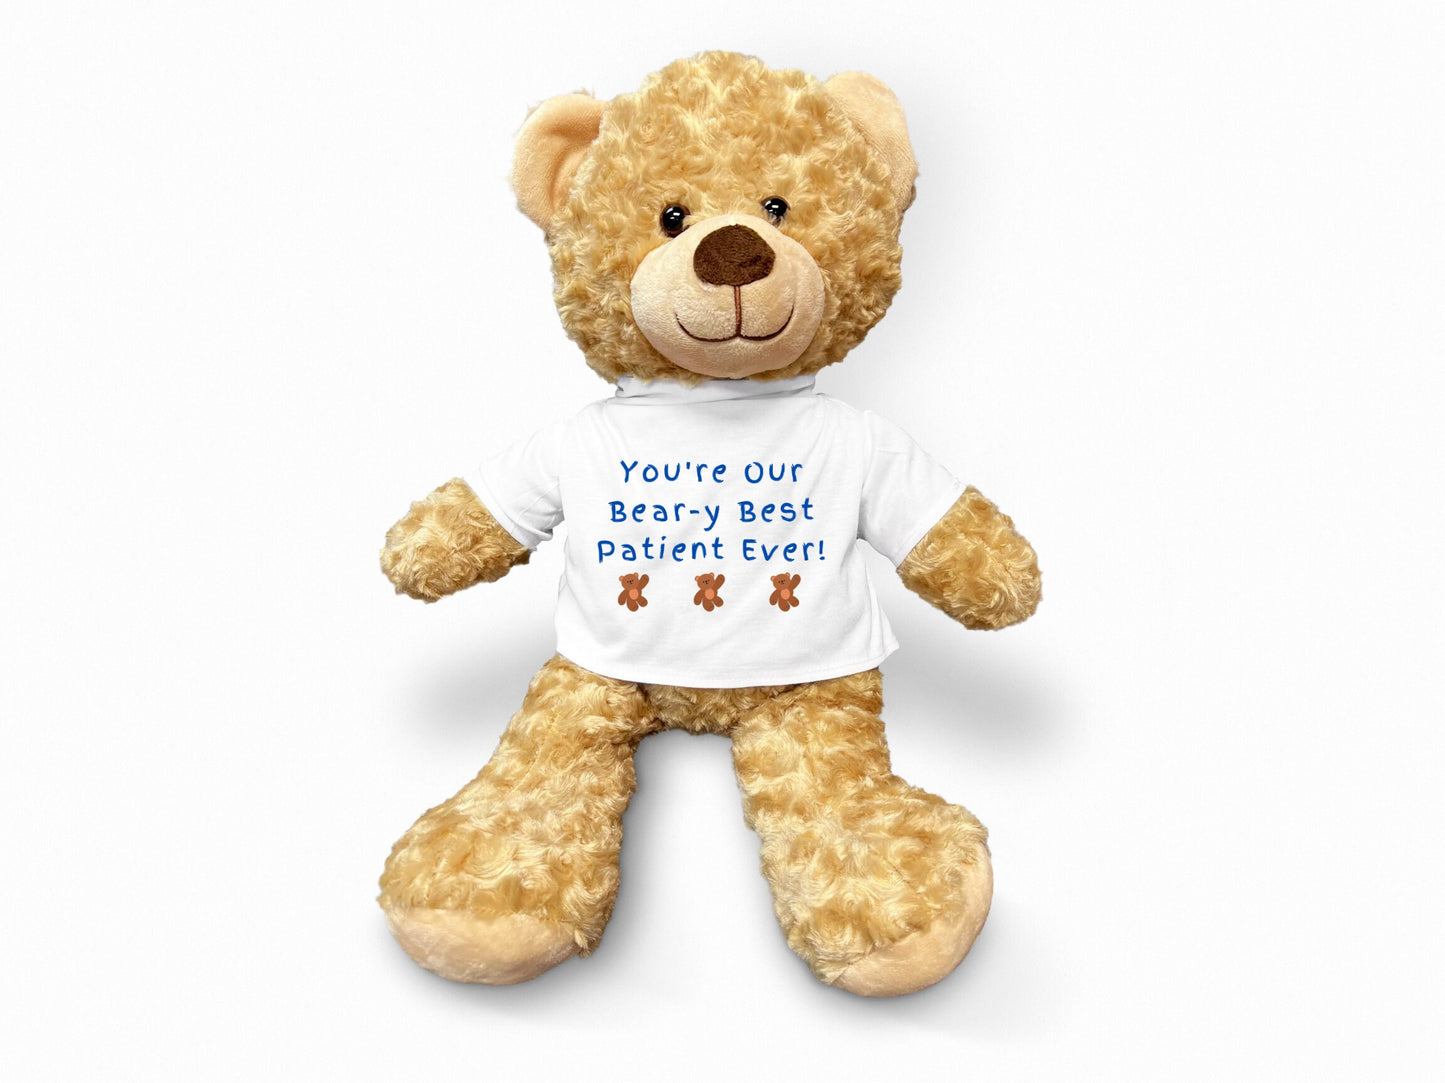 Child Patient Teddy Bear Gift, You're The Beary Best Patient Ever, Custom Teddy Bear, Children's Hospital Gift, Patient Gift, Child Patient